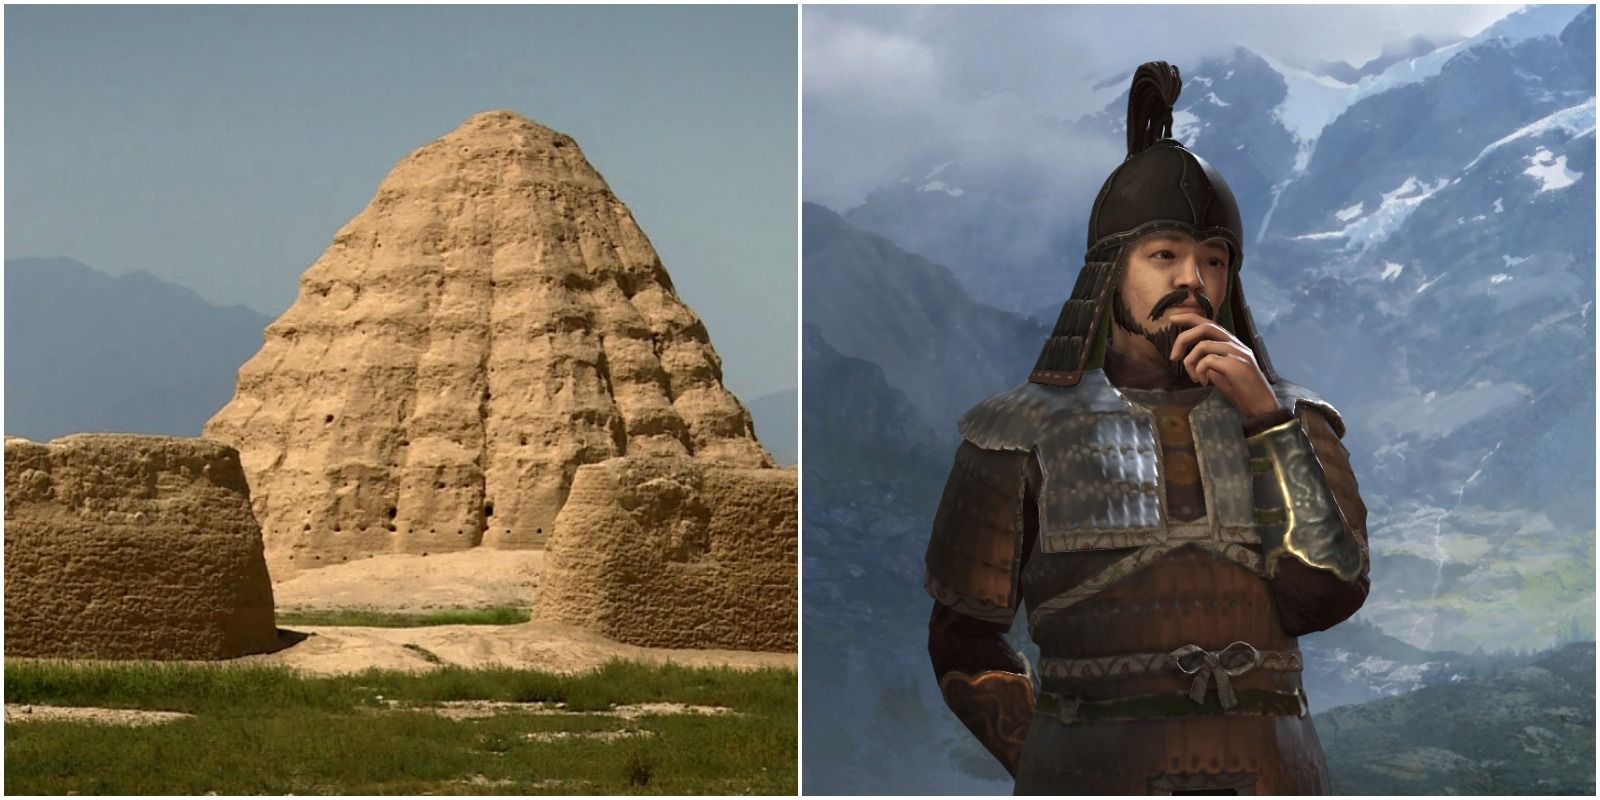 Hsexje Religion: Tangut Mound and Warrior in Mountains from CK3